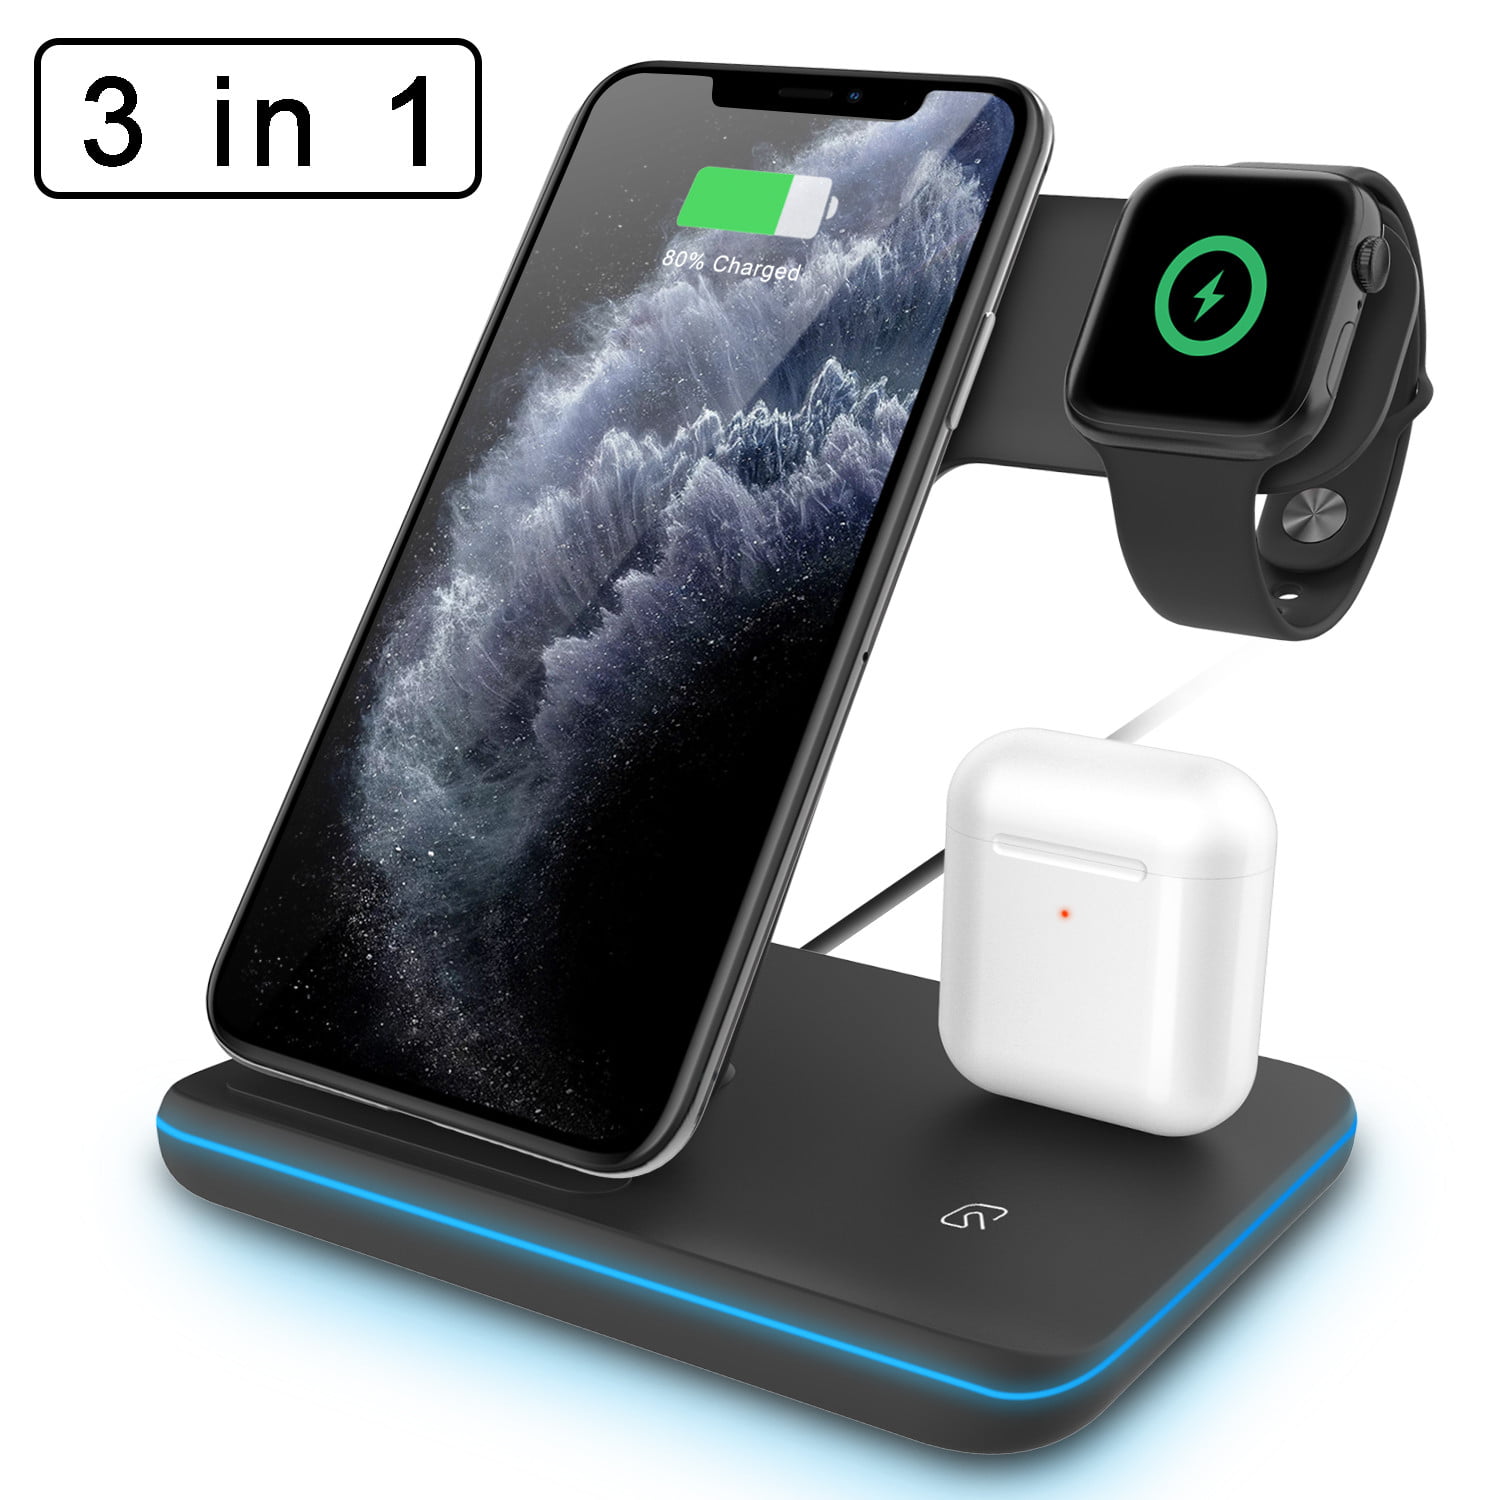 Elegant Choise 3 in 1 Qi Fast Wireless Charger Stand Dock Pad for